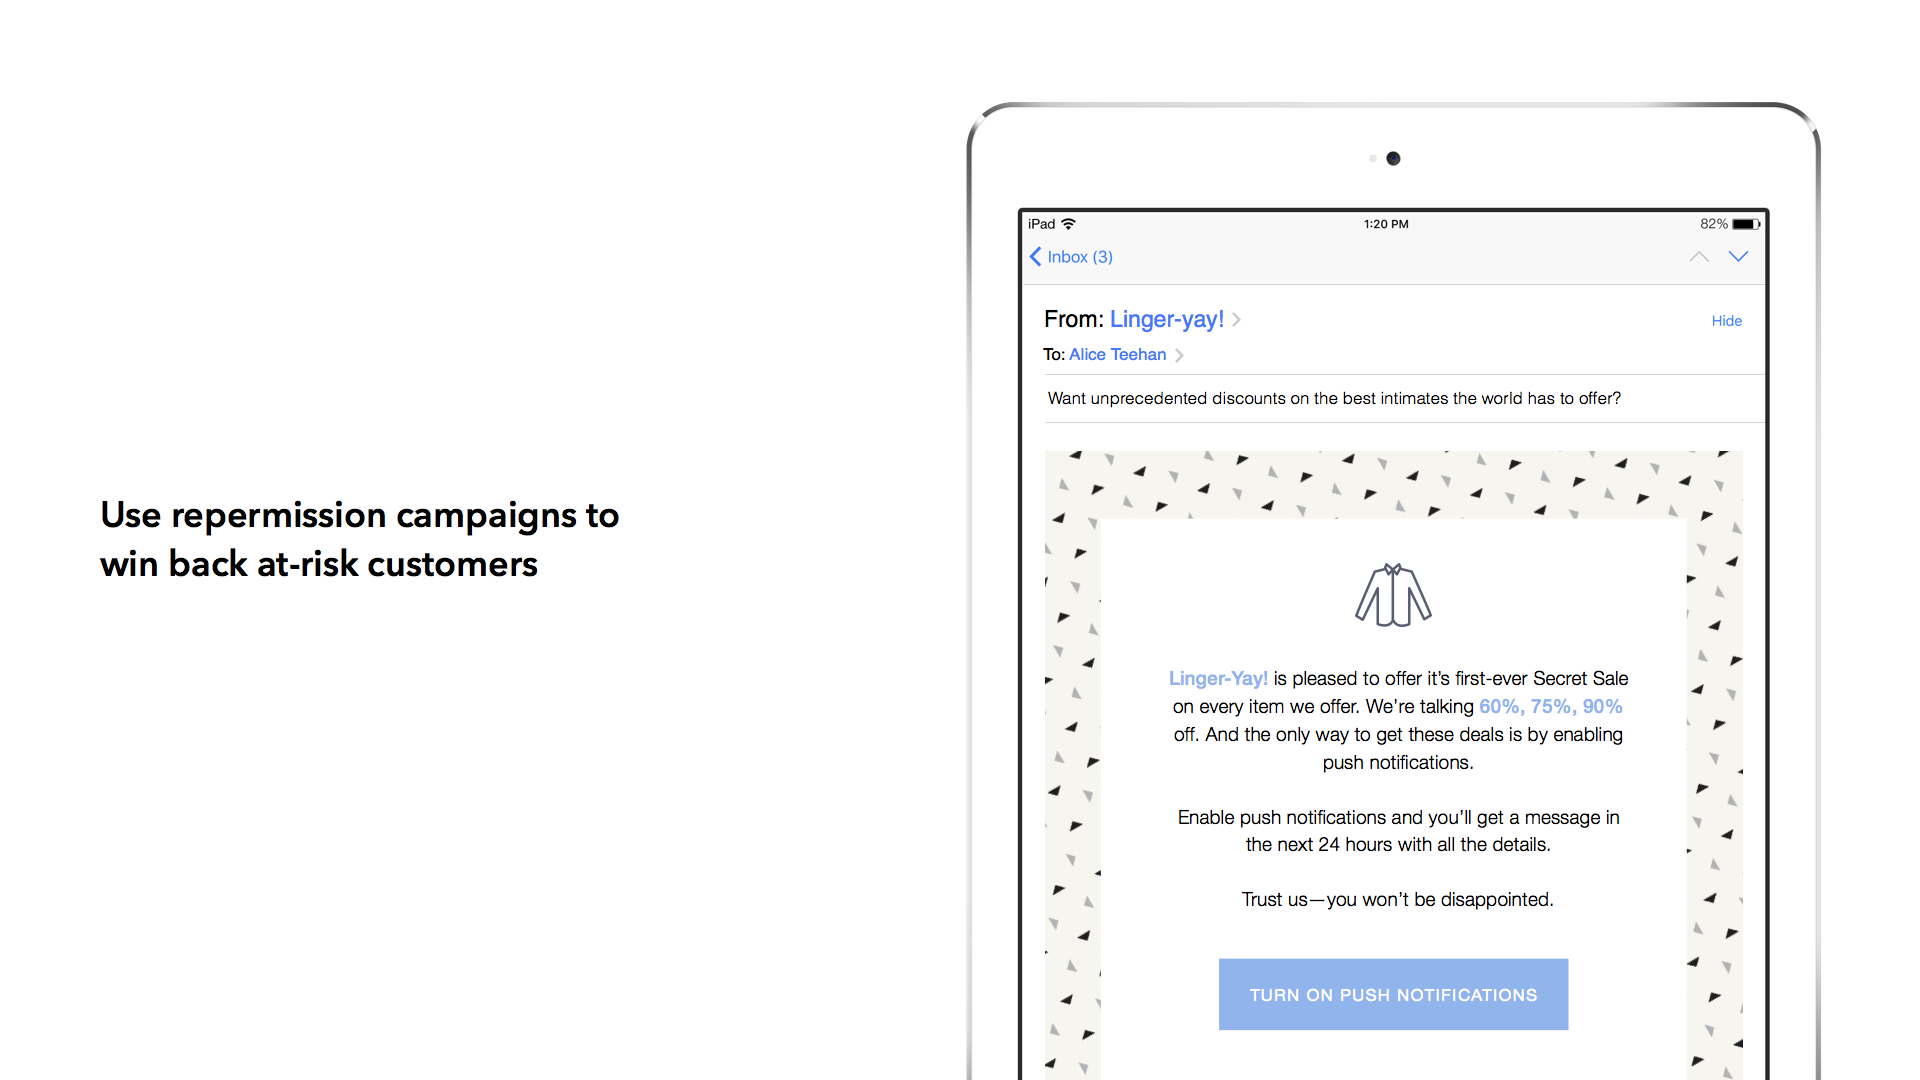 Use repermission campaigns to win back customers